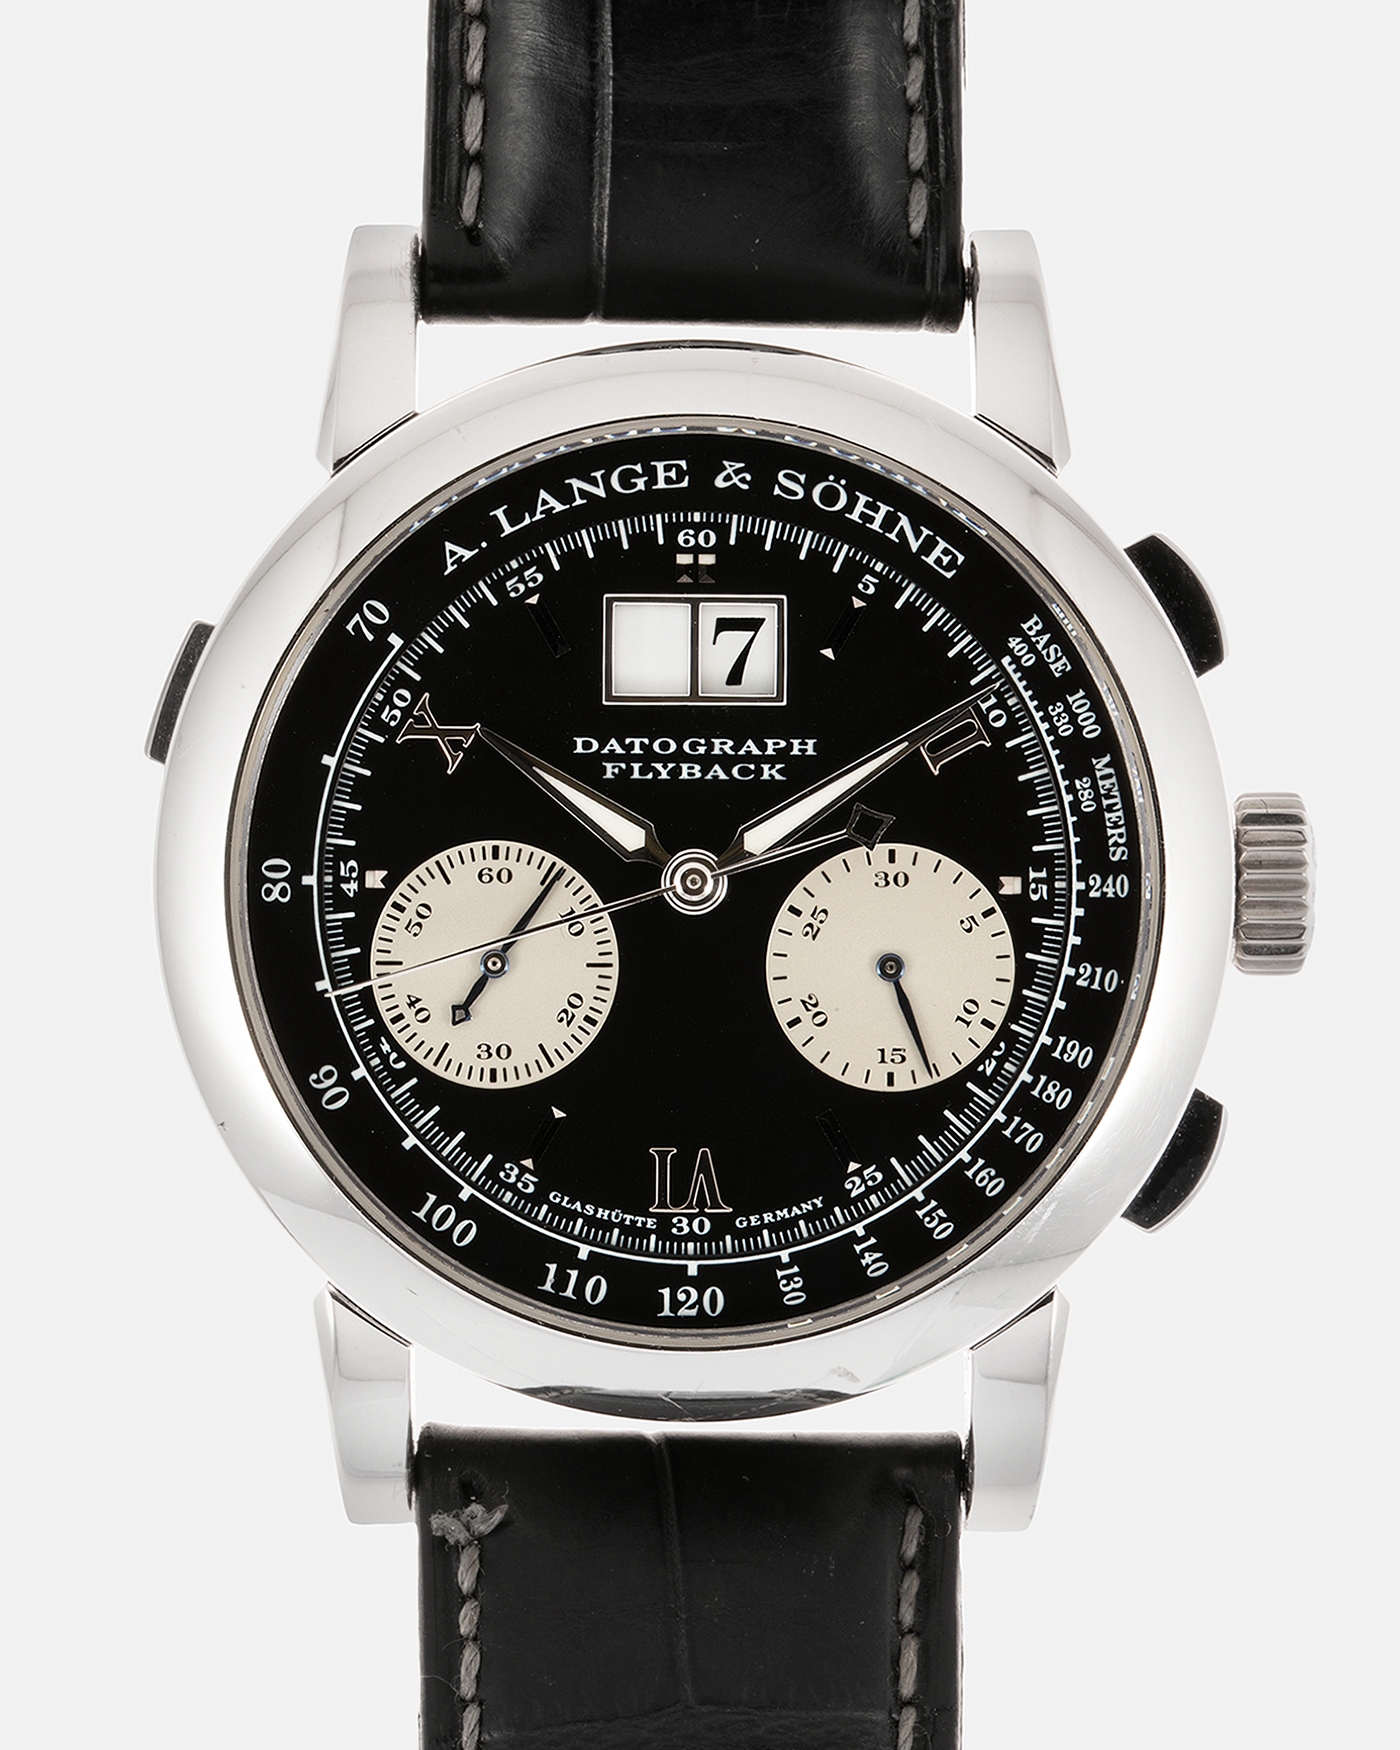 Brand: A. Lange & Söhne Year: 2007 Model: Datograph Reference Number: 403.035 Material: Platinum Movement: A. Lange & Söhne Cal. L951.1, Manual-Winding Case Diameter: 39mm Strap: A. Lange & Söhne Dark Grey Textured Calf with Signed Platinum Tang Buckle